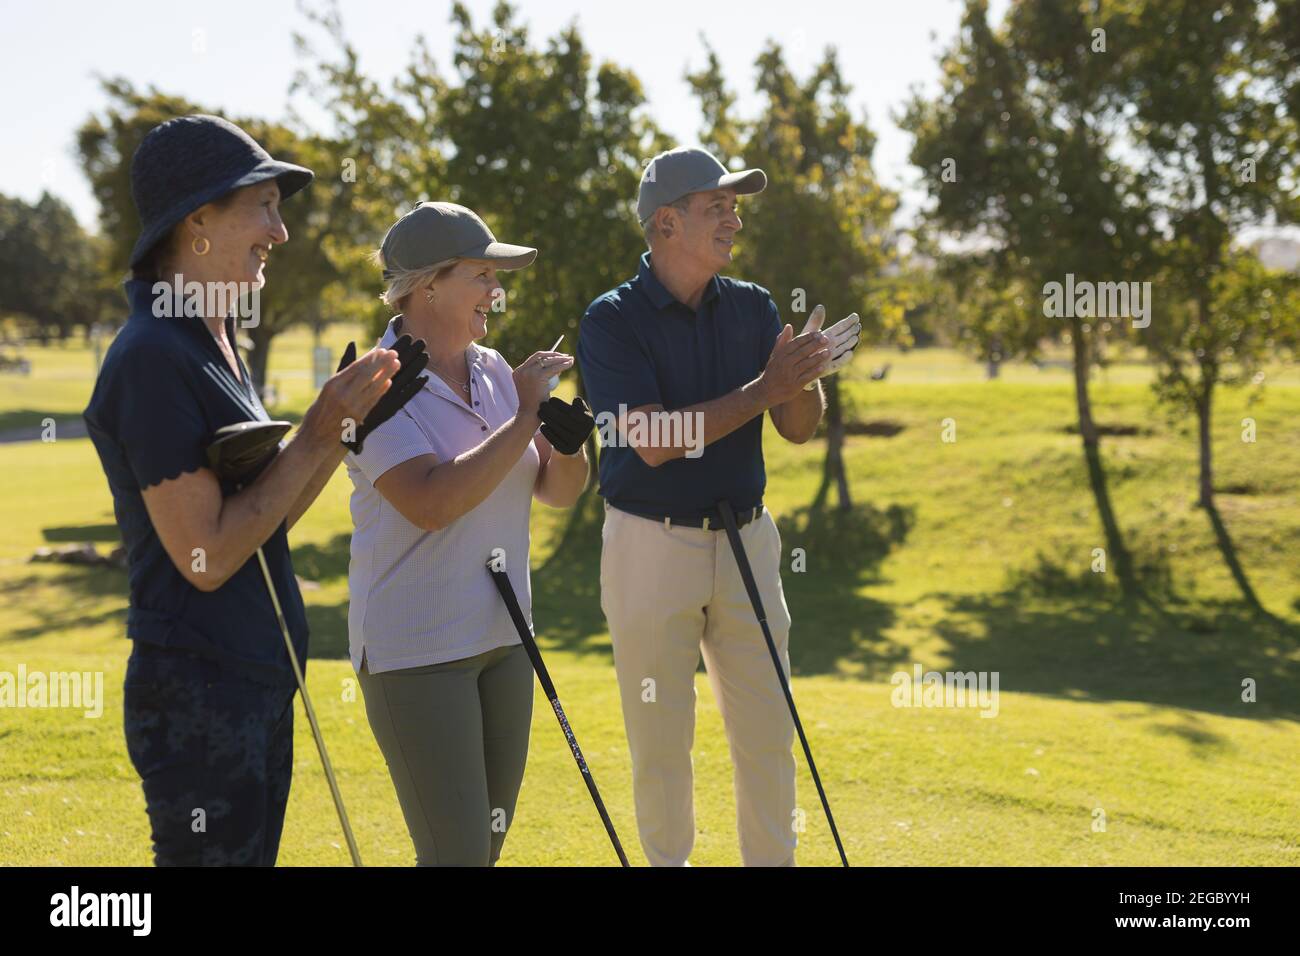 Three caucasian senior men and women holding golf clubs and clapping Stock Photo